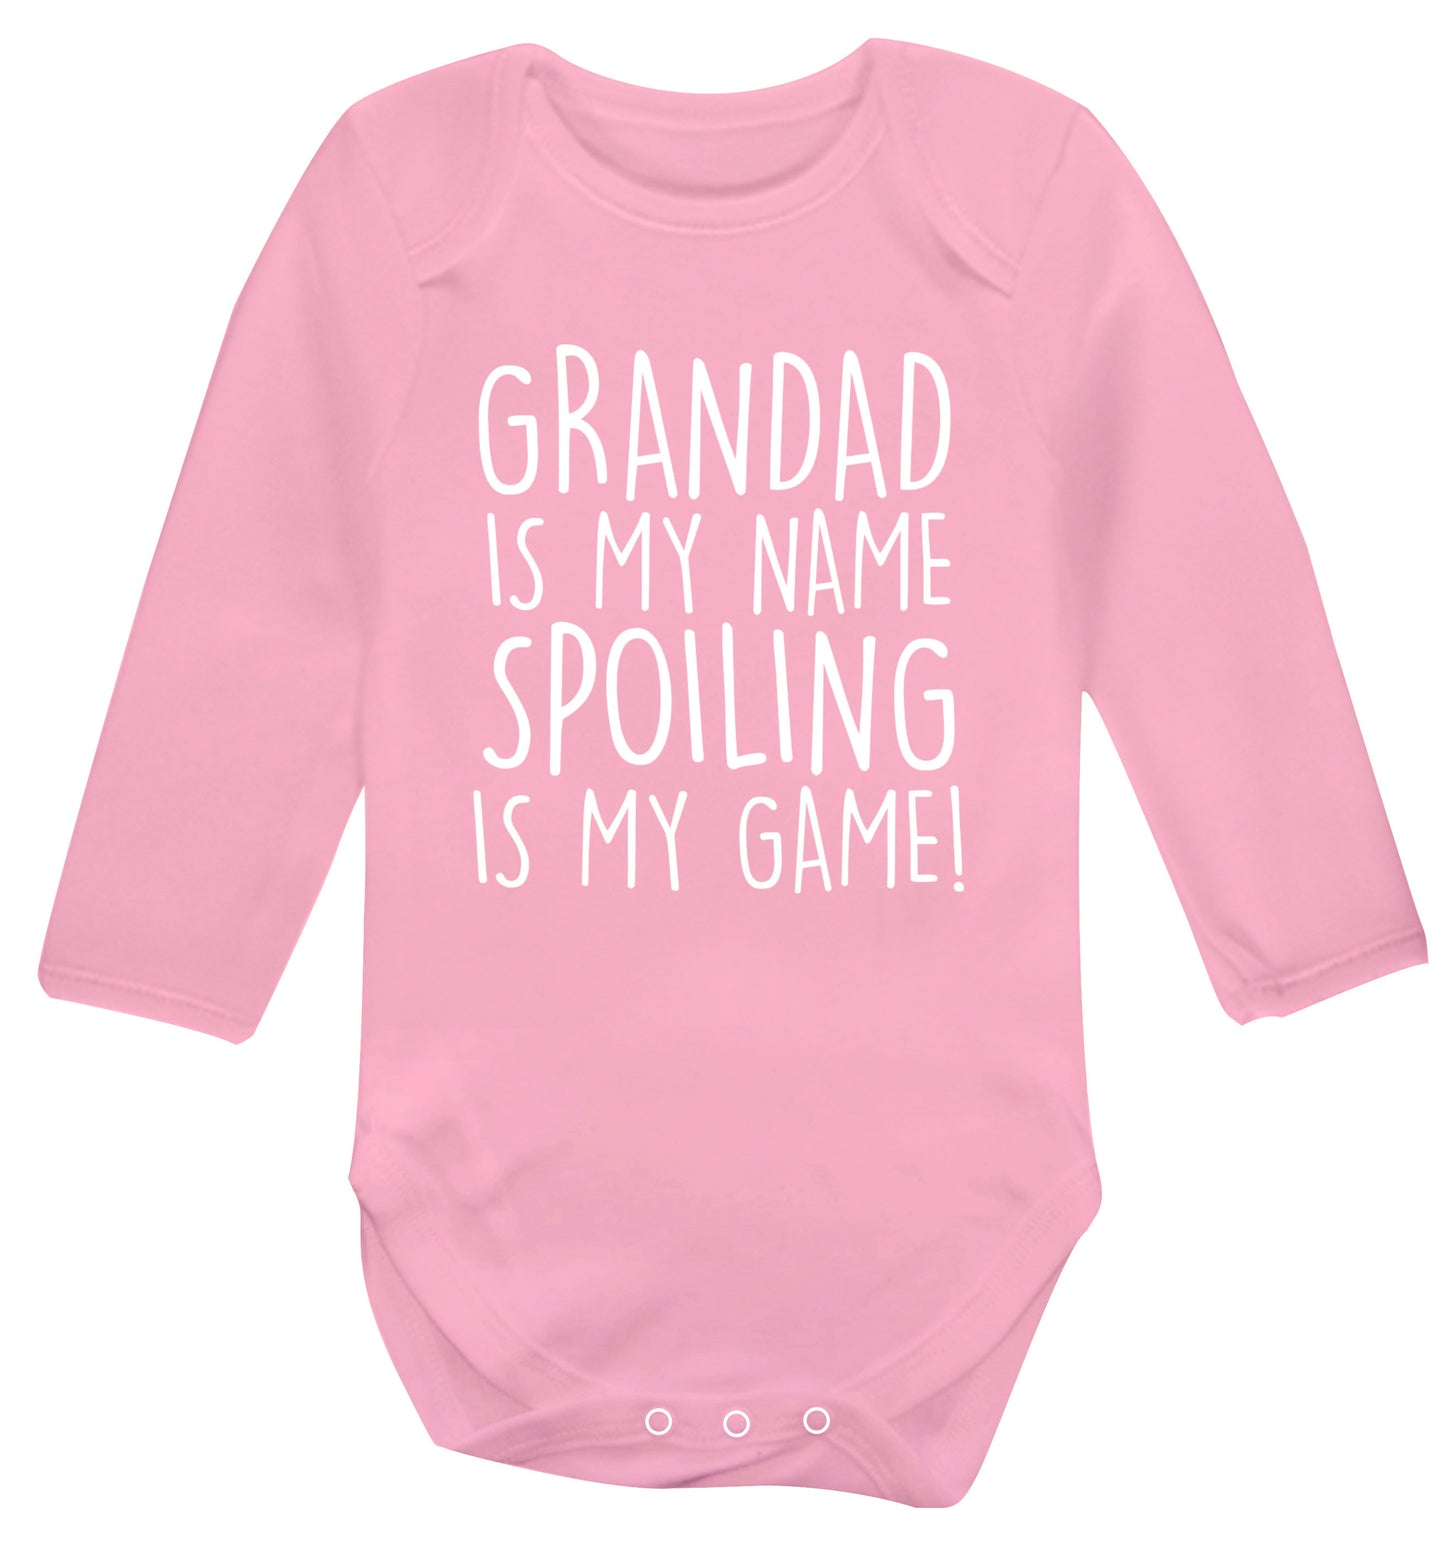 Grandad is my name, spoiling is my game Baby Vest long sleeved pale pink 6-12 months